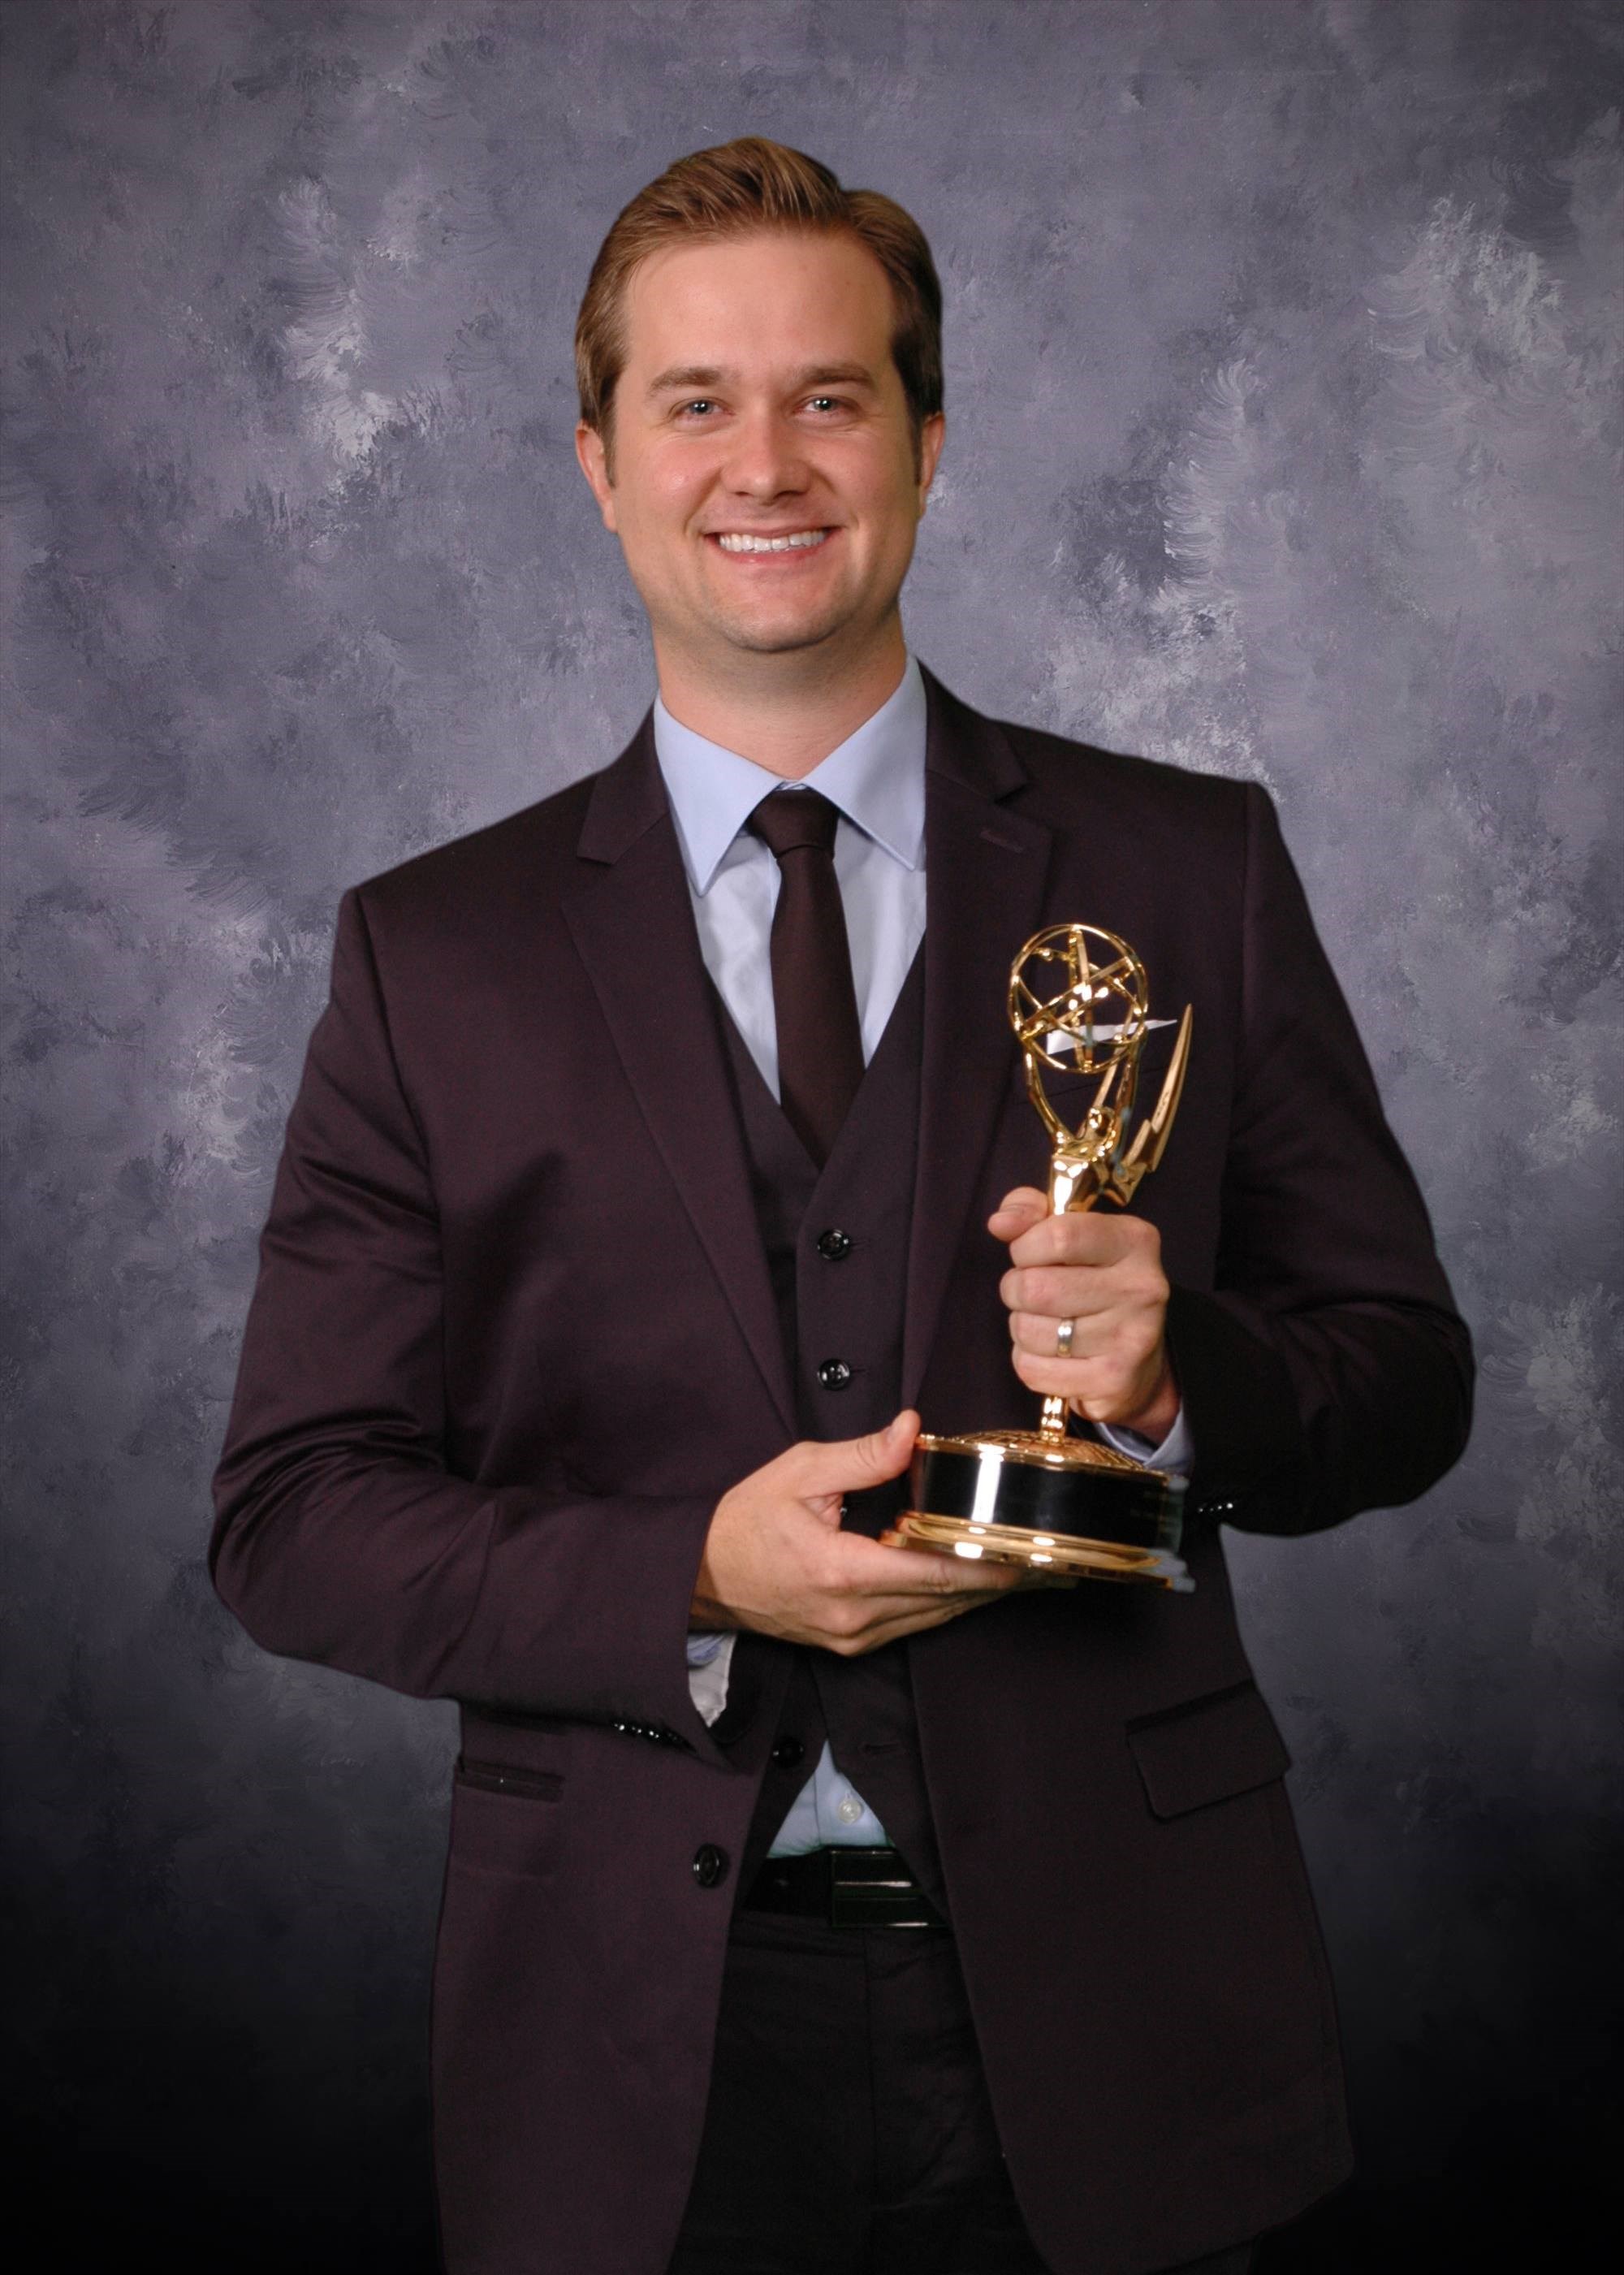 At the 2013 Mid-America Emmy Awards